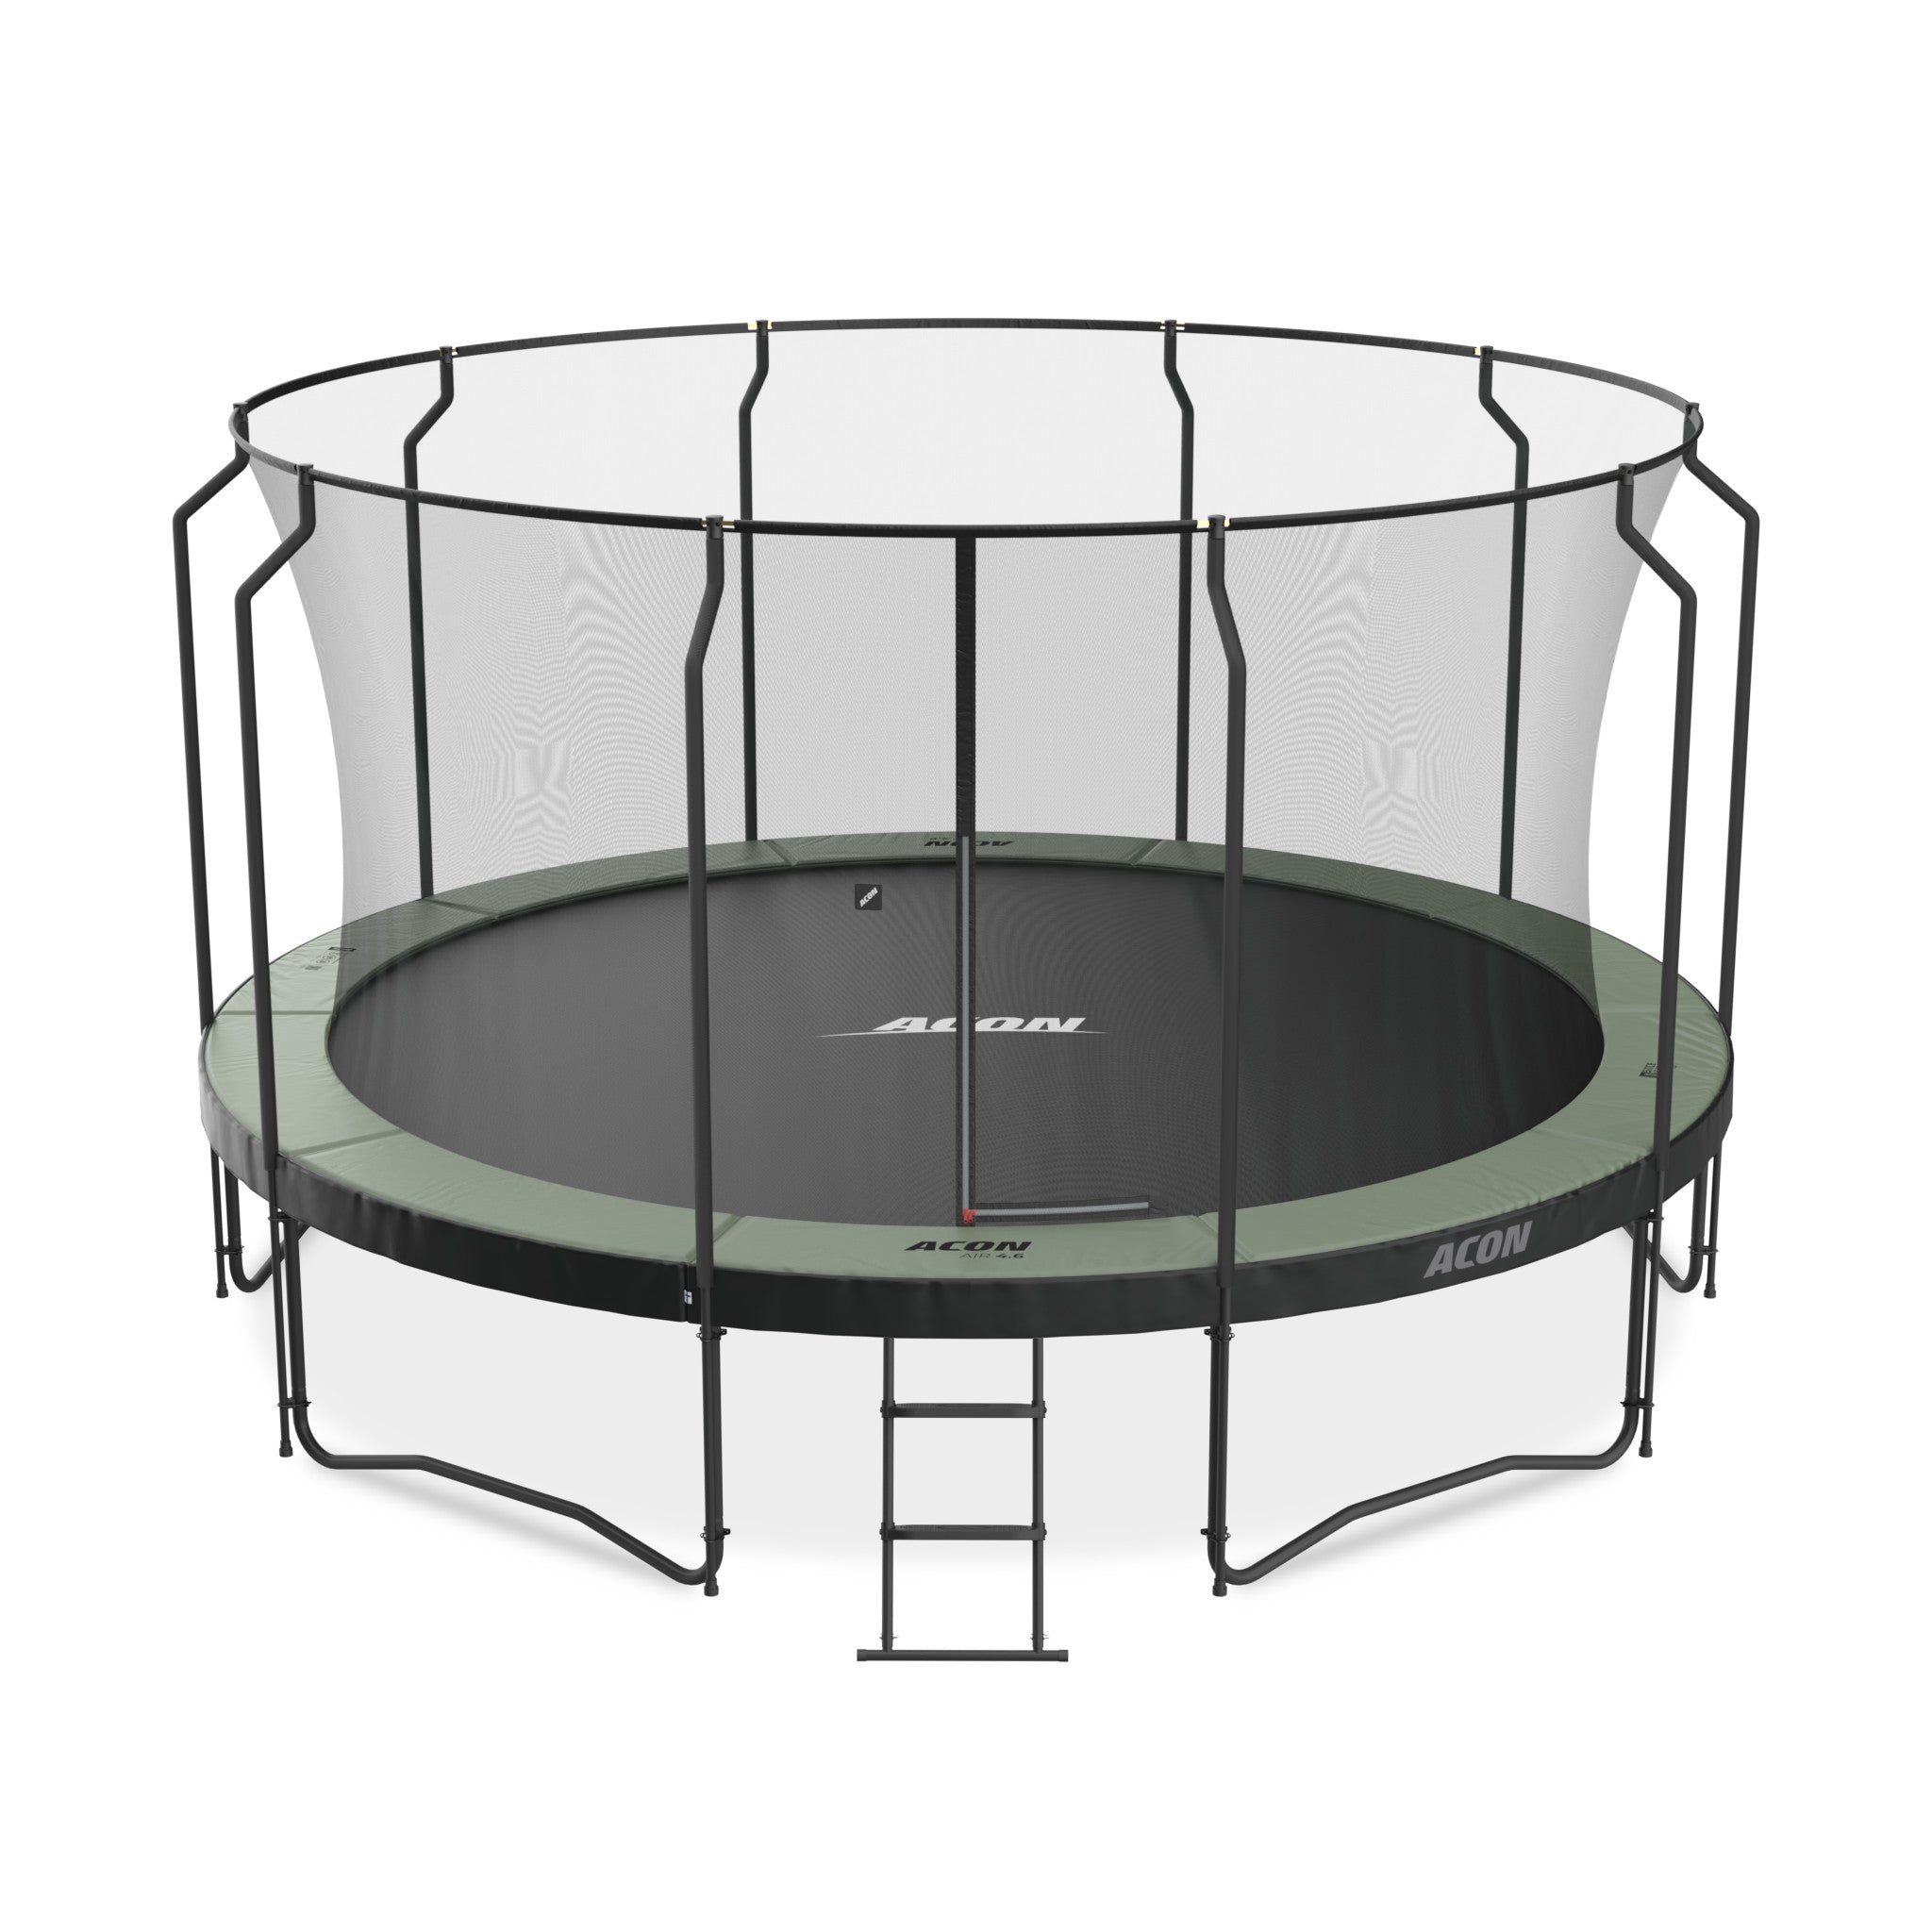 ACON Air 15ft Trampoline with Premium Enclosure and ladder.